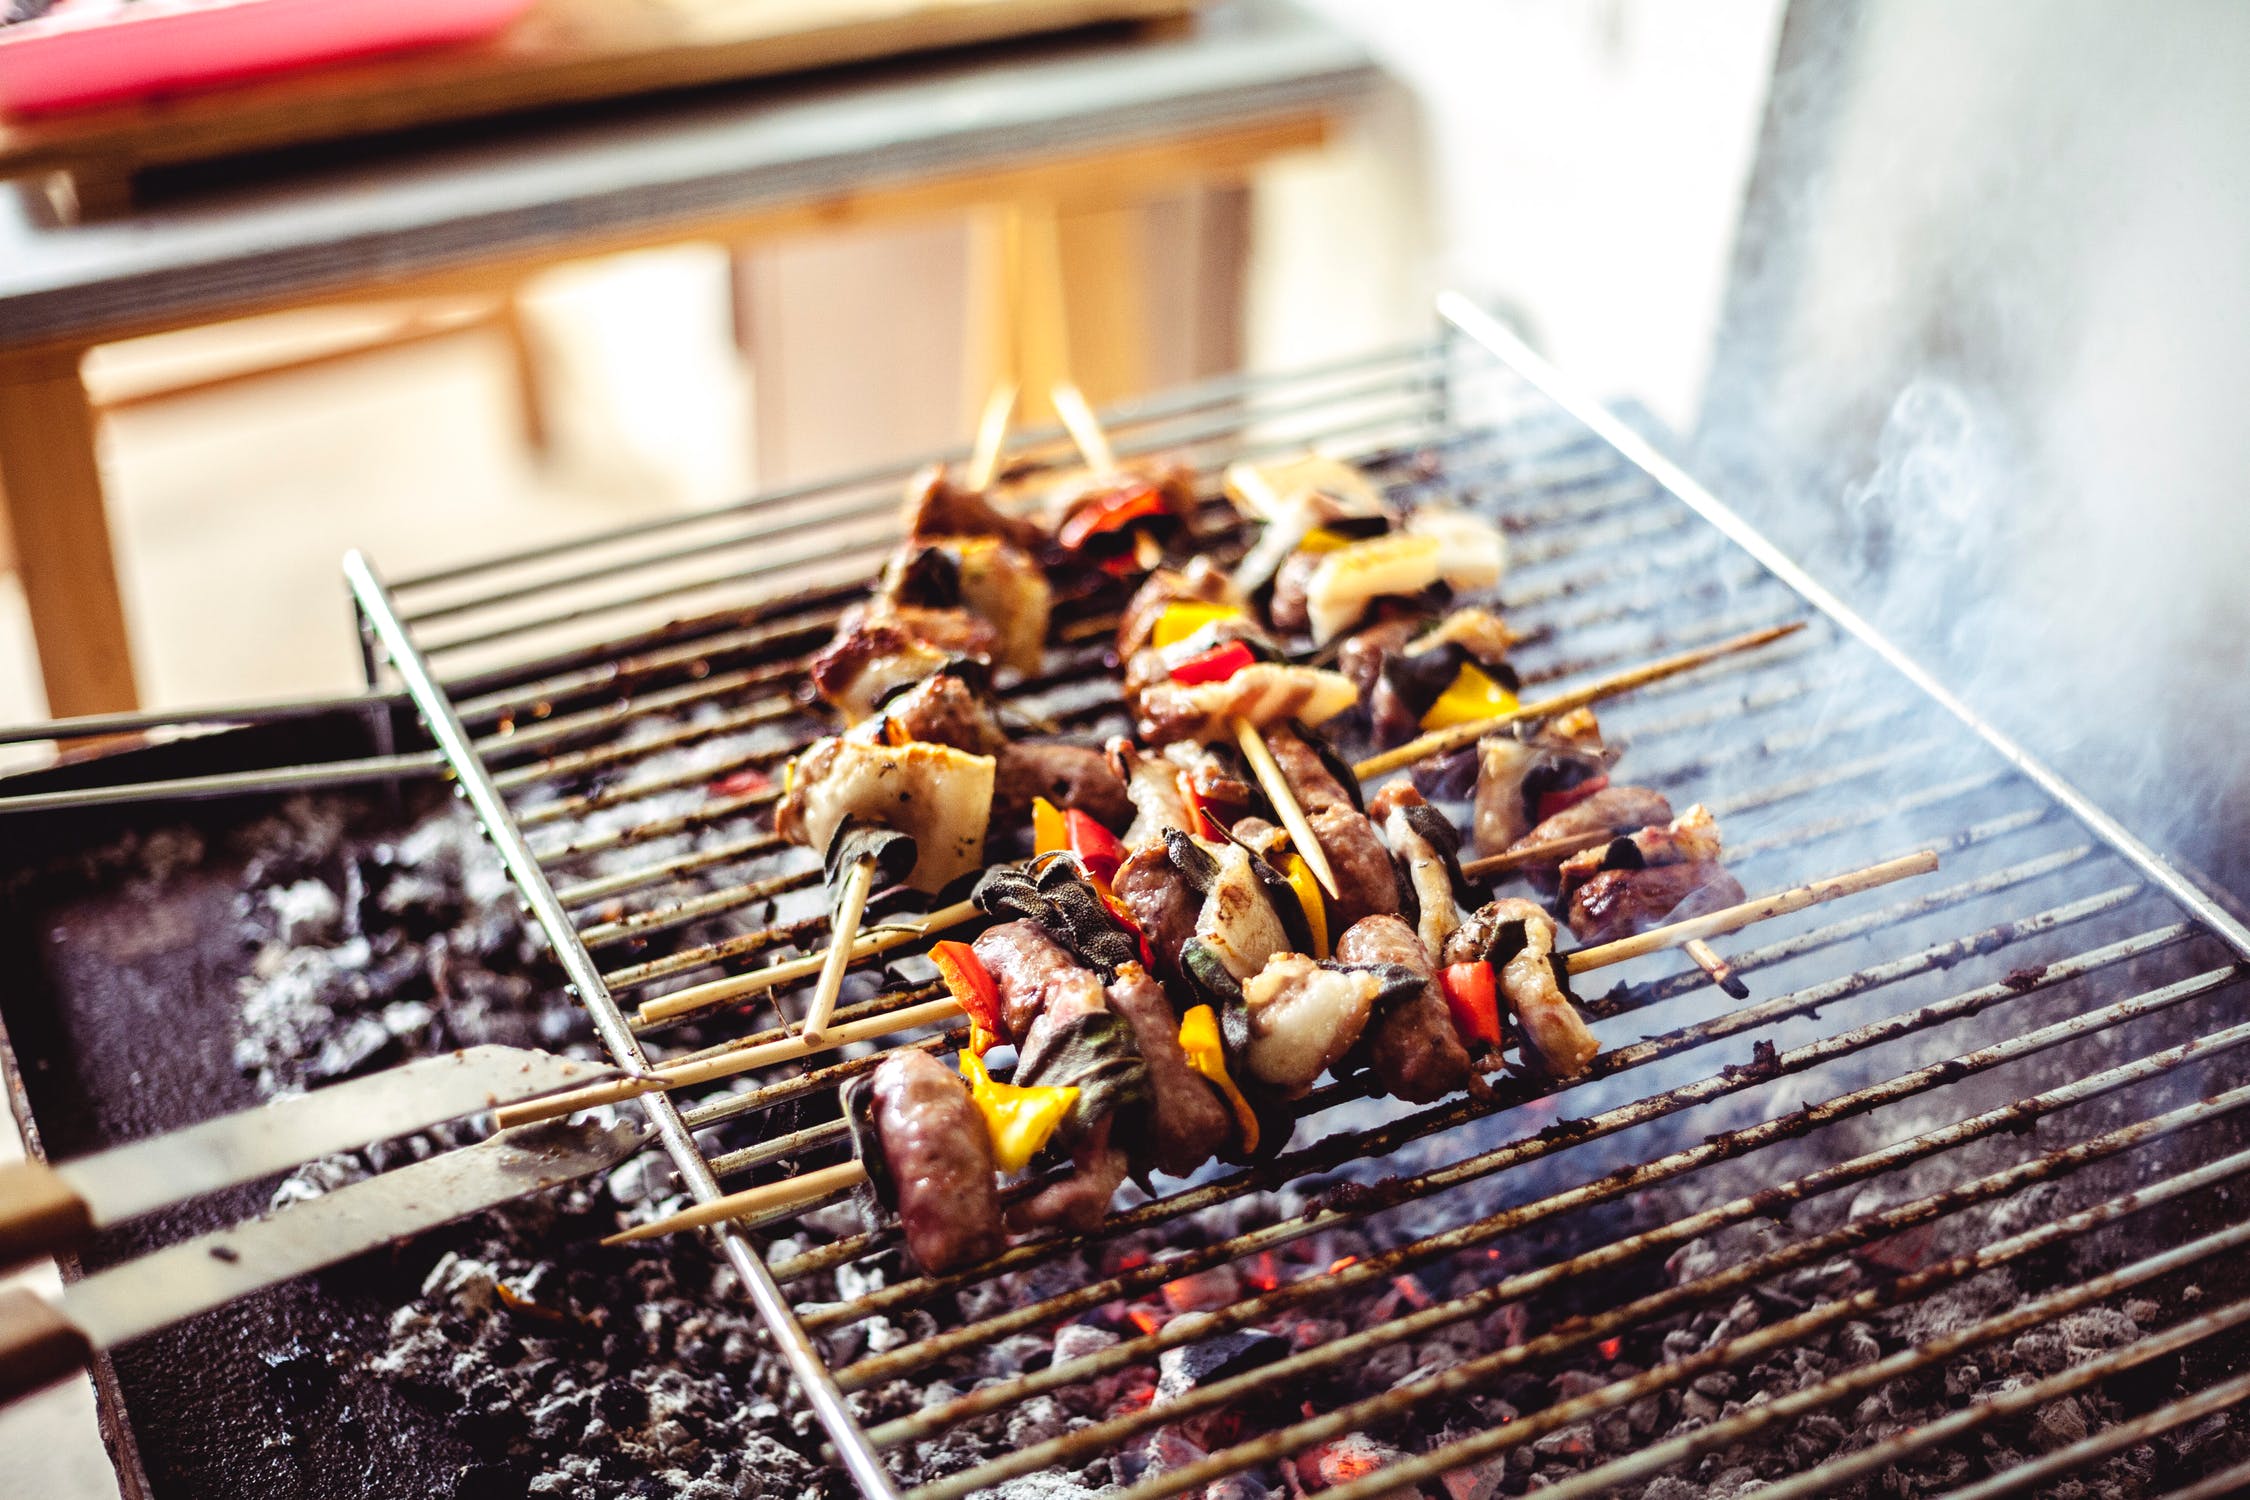 Kabob skewers with meat and veggies on hot backyard grill